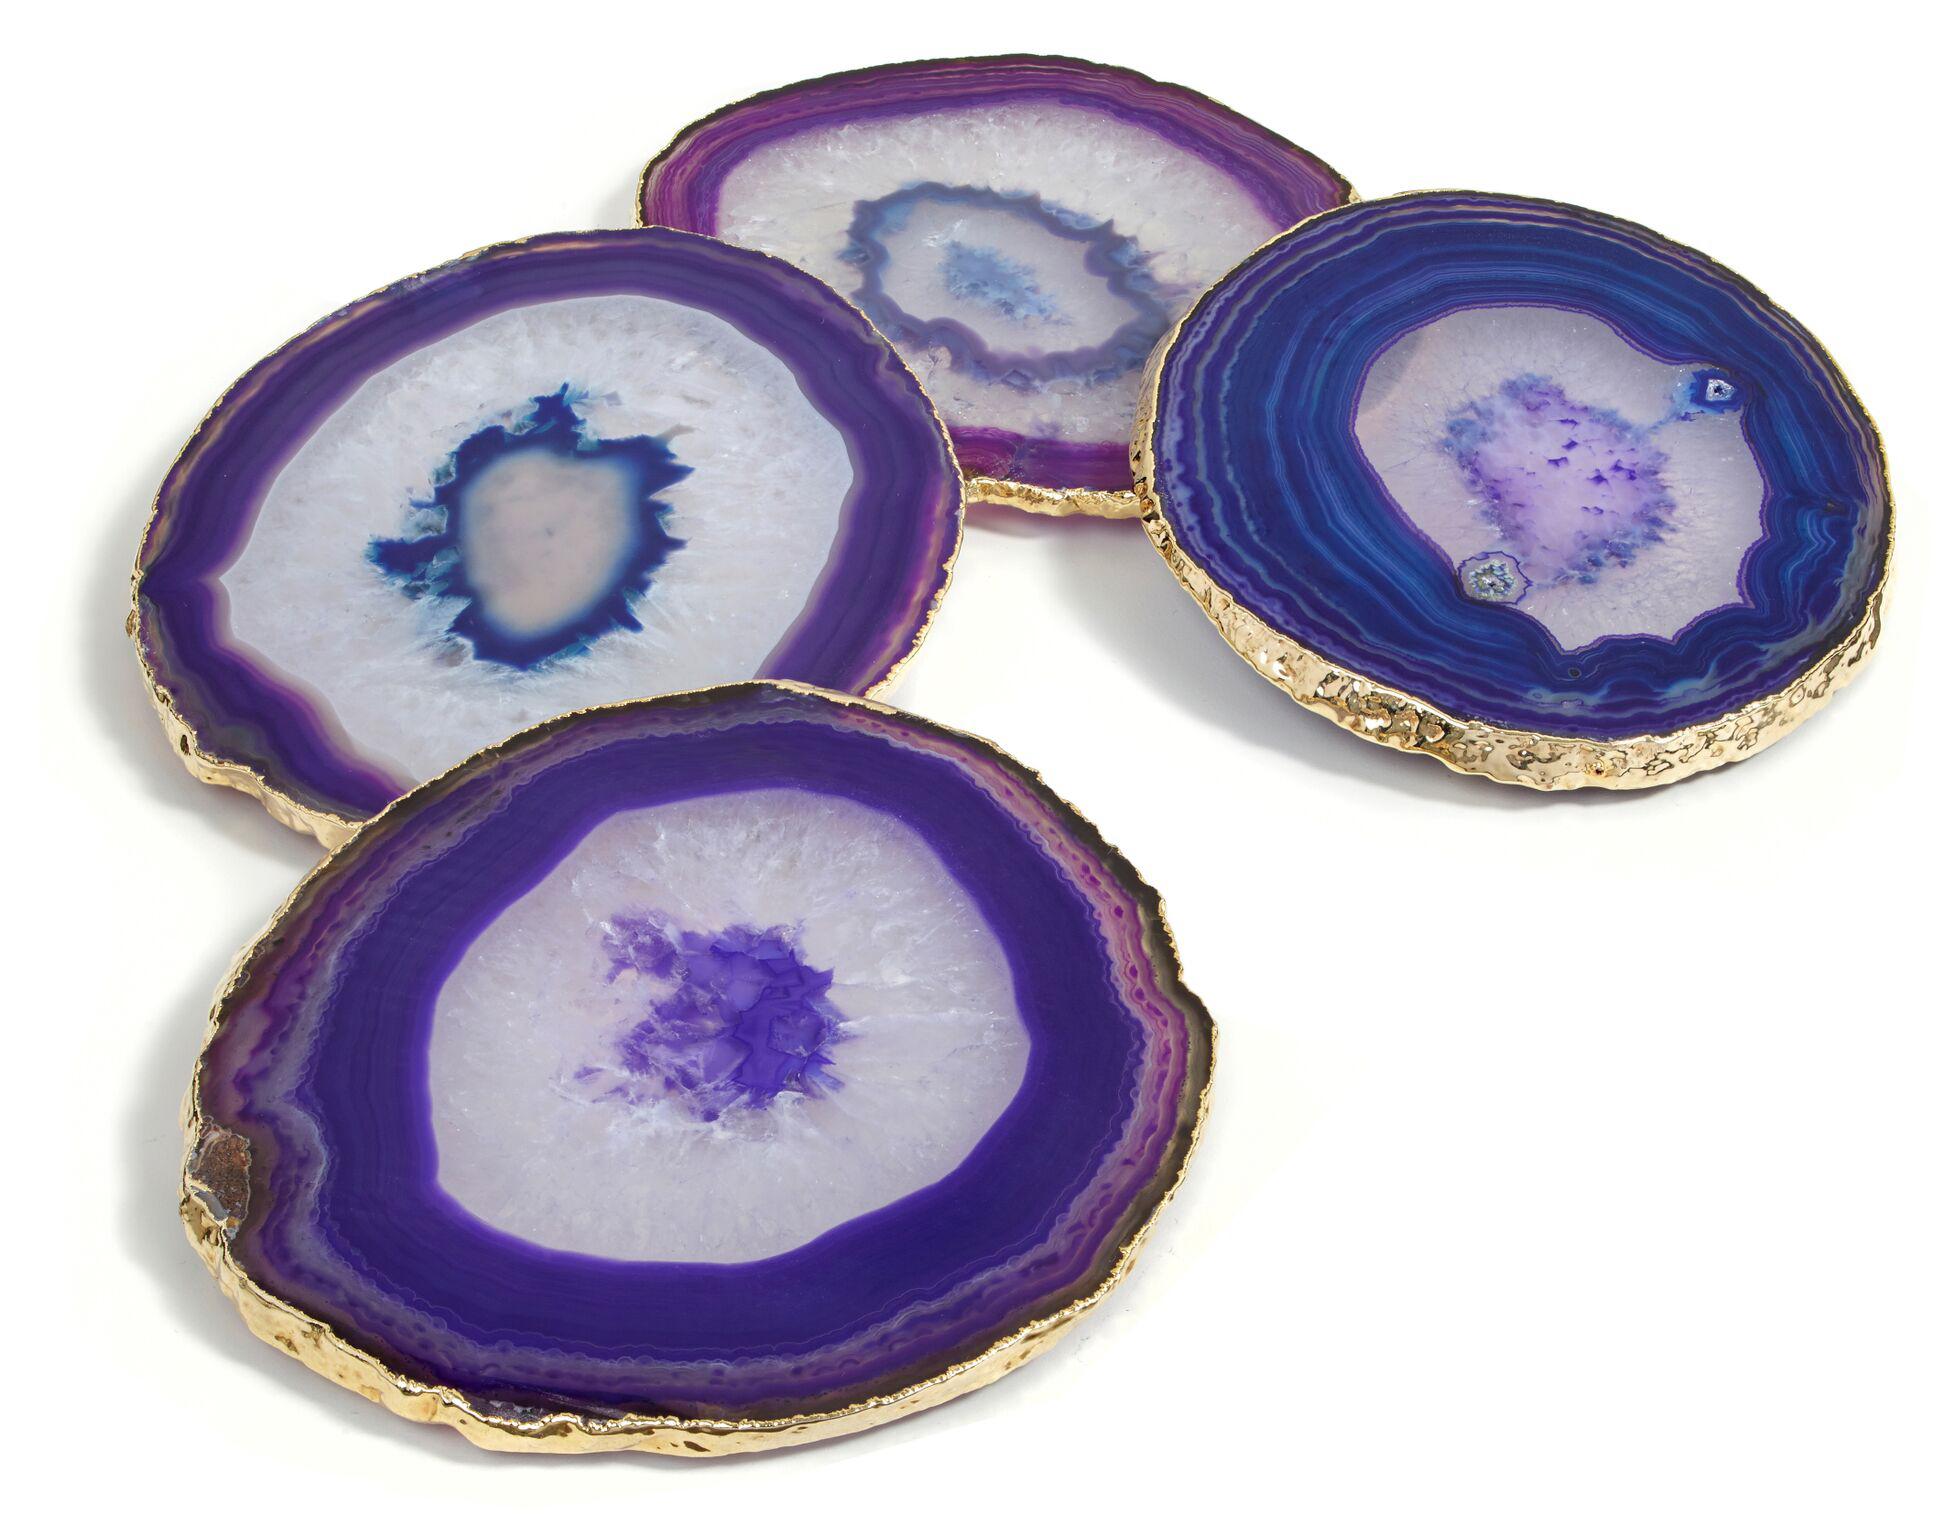 Brazilian Lumino Coasters in Eggplant Agate and 24-Karat Gold by ANNA new york For Sale